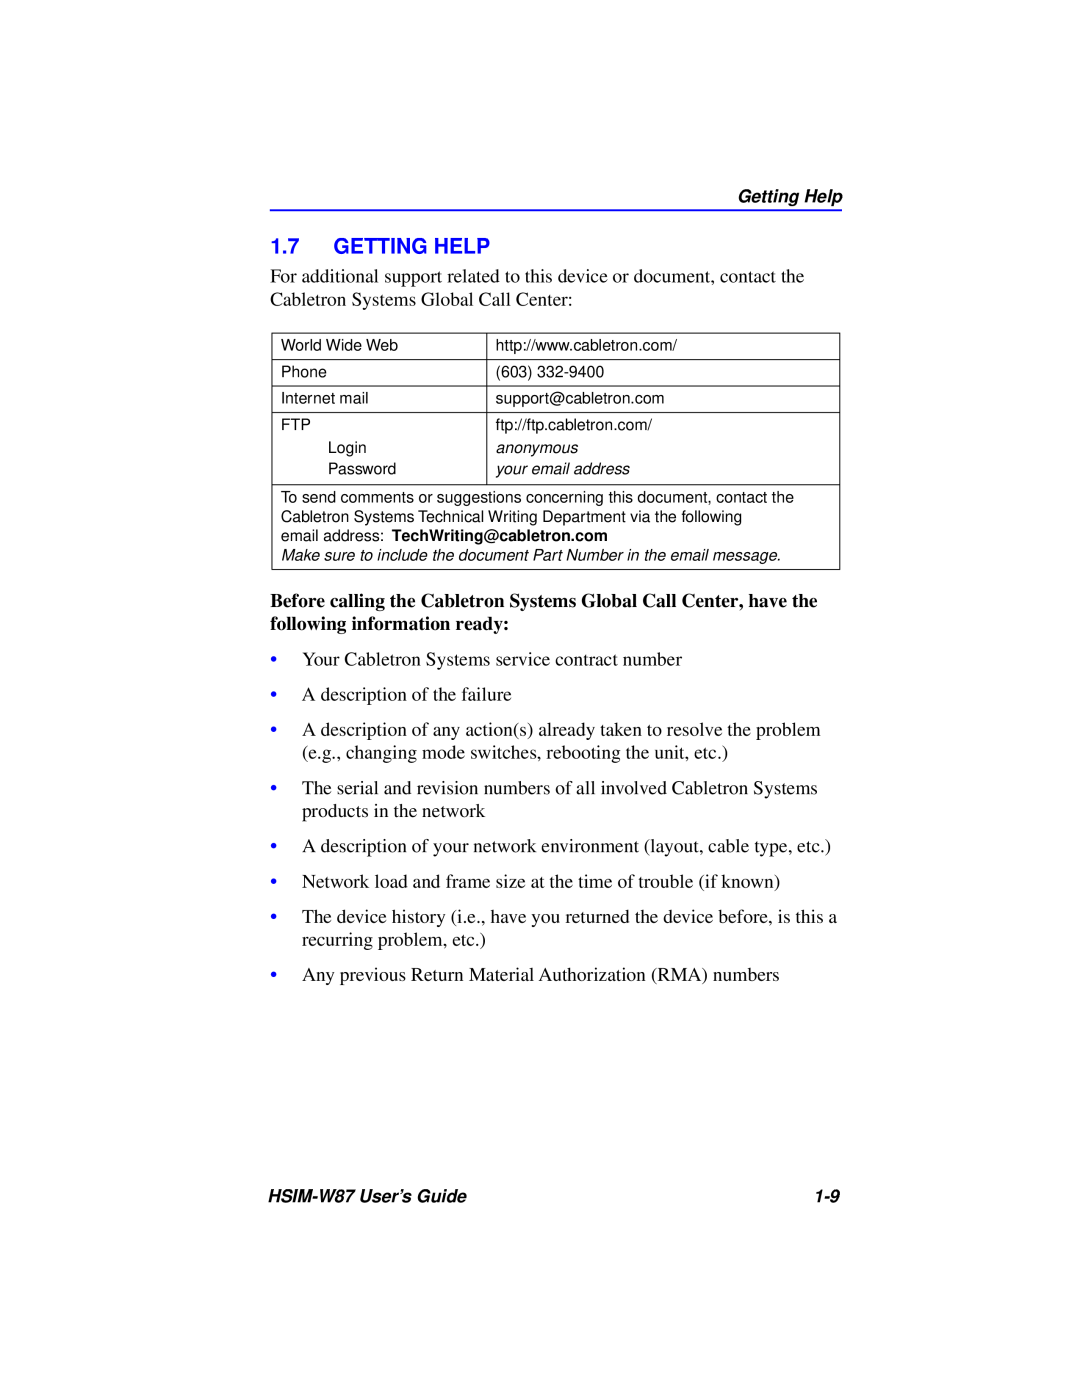 Cabletron Systems HSIM-W87 manual Getting Help 